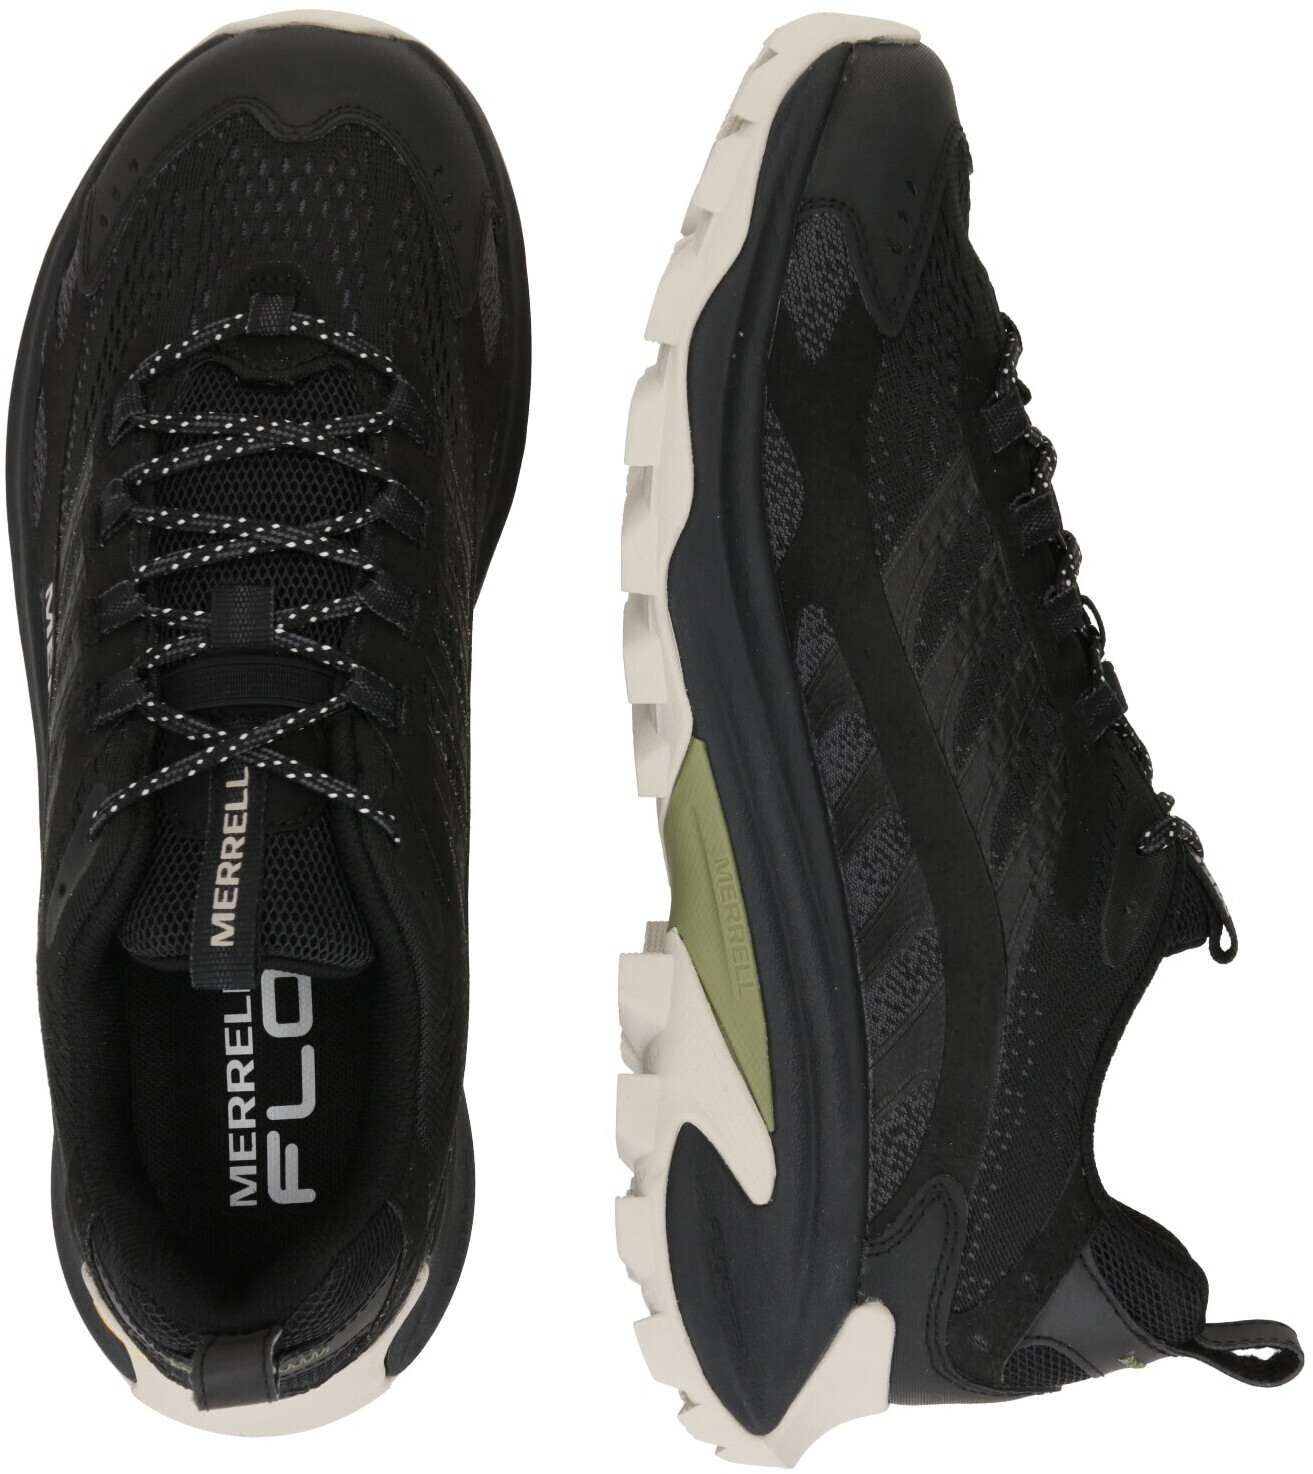 Buy Merrell Moab Speed 2 black from £119.95 (Today) – Best Deals on ...